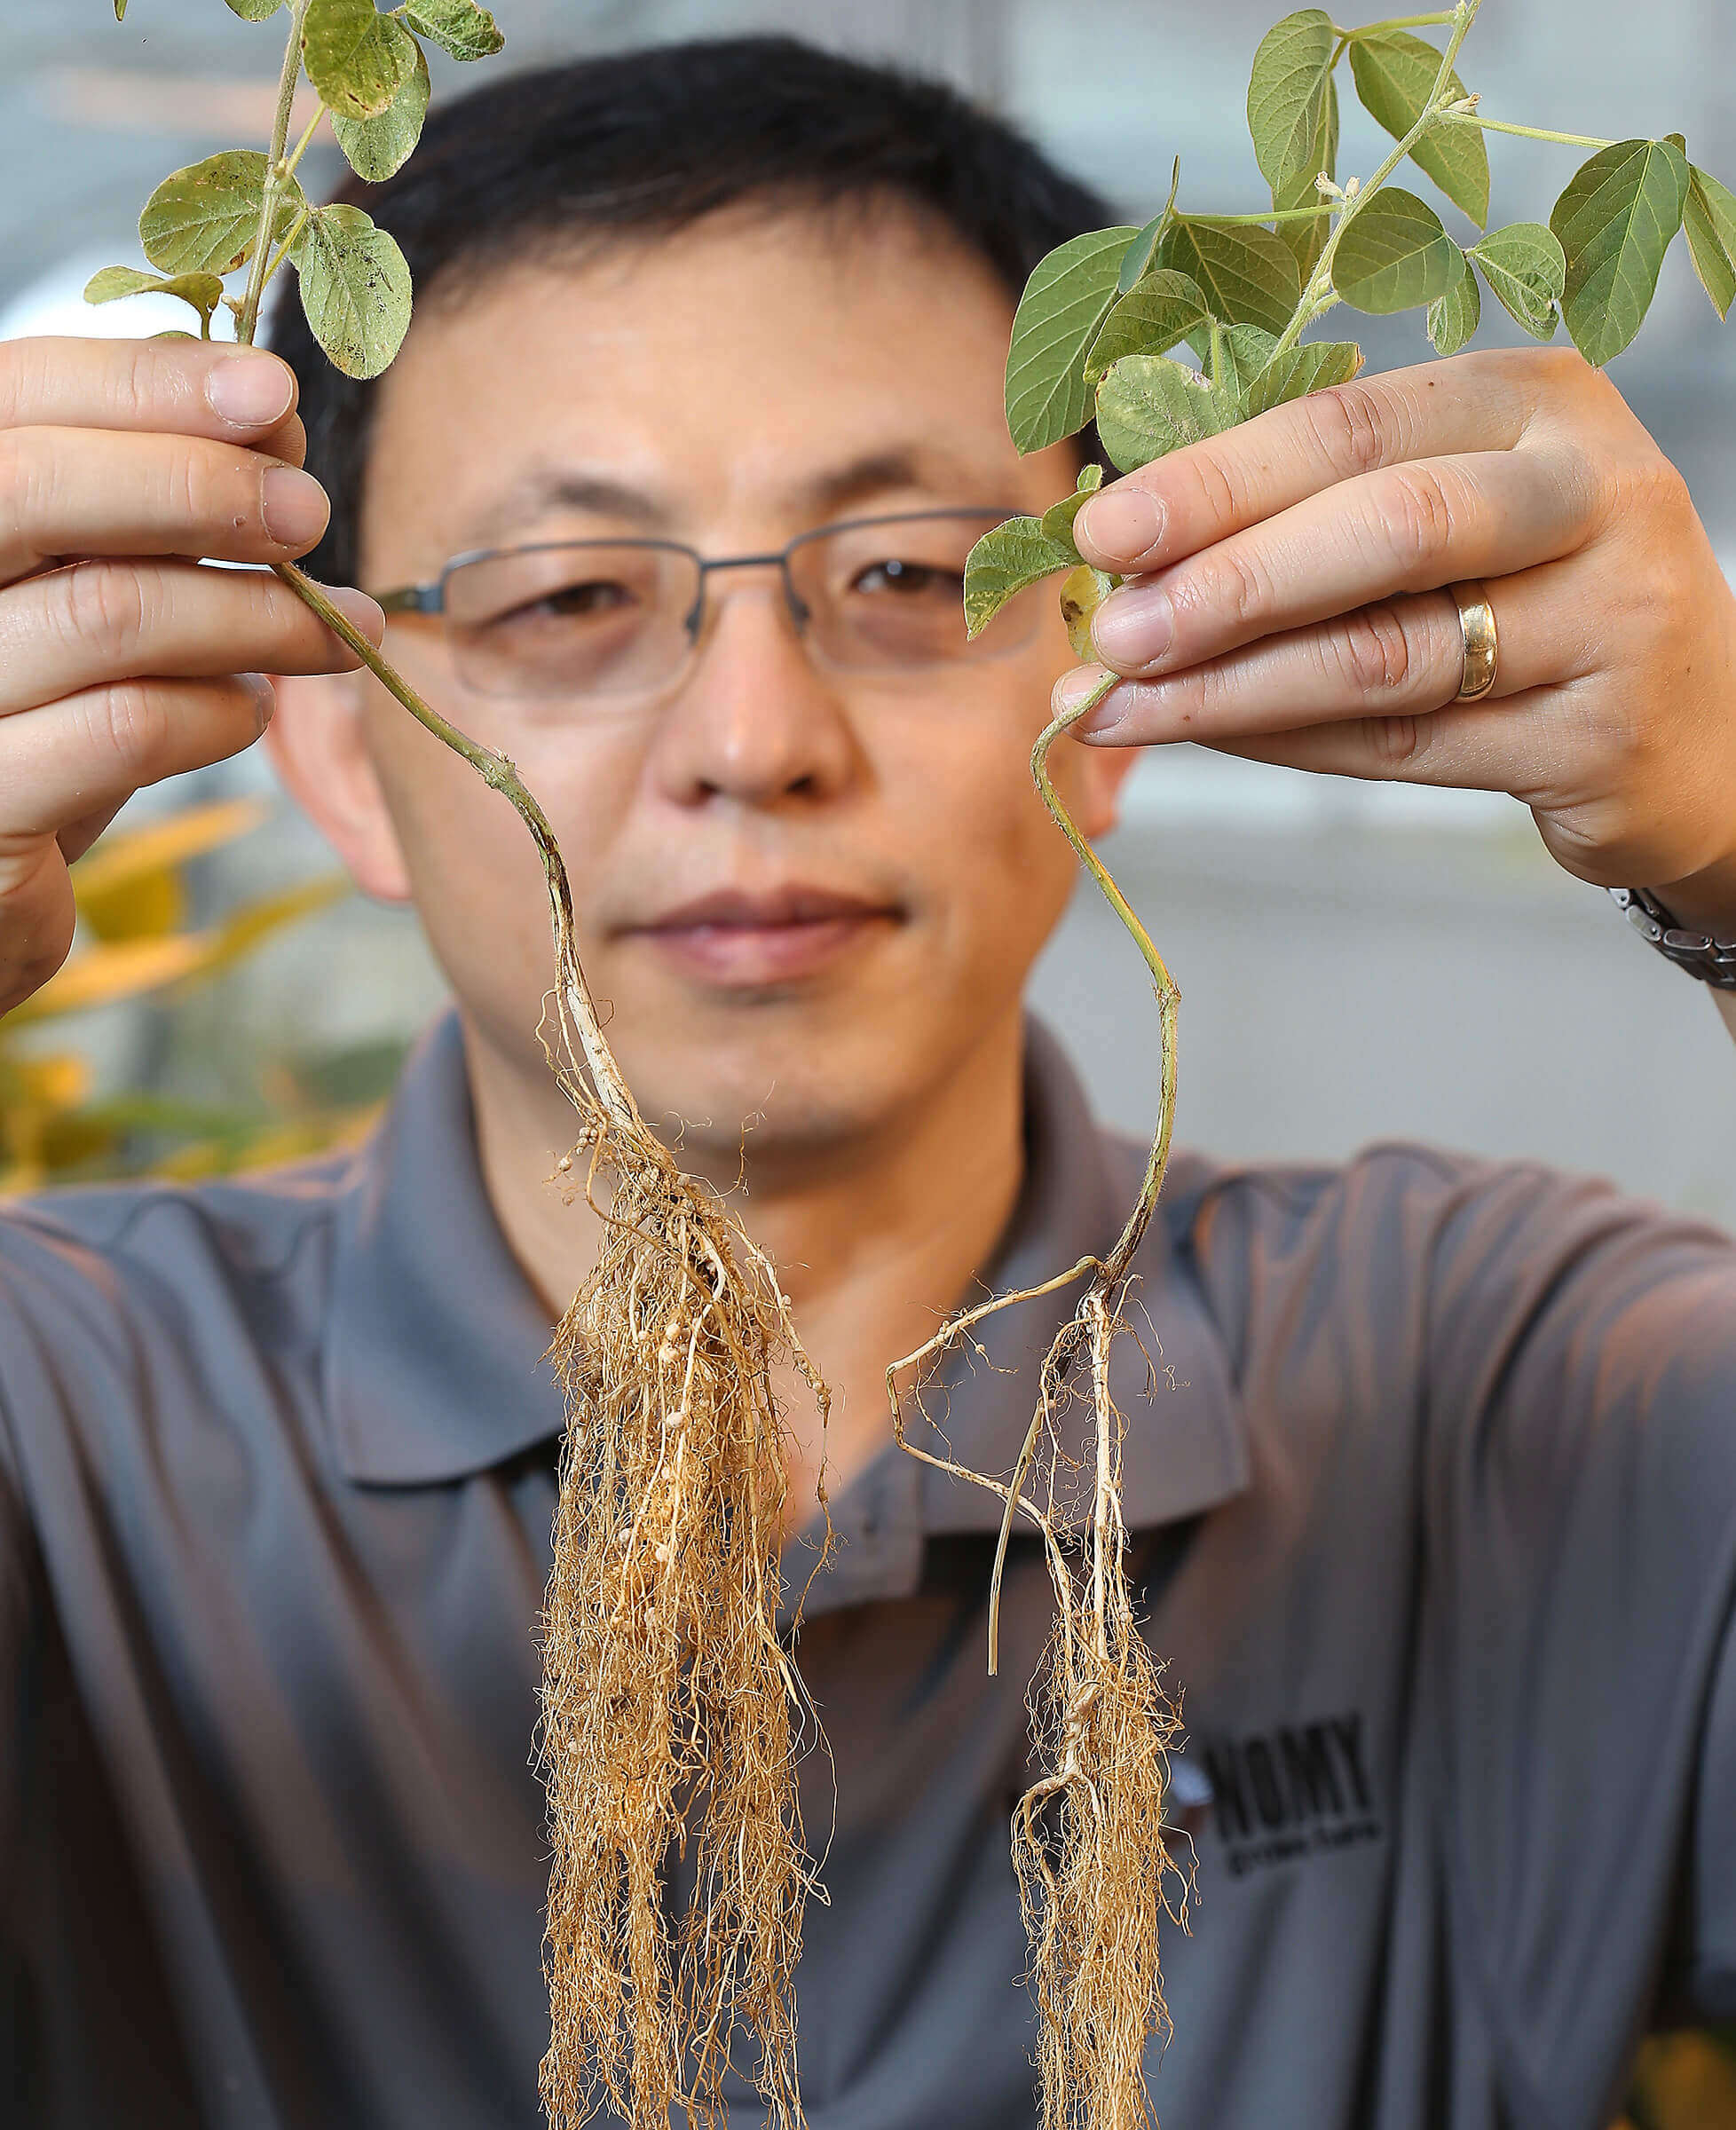 Here, Jianxin Ma shows the difference between soybean roots in which nodule-suppressing genes have been knocked out by CRISPR-Cas9 gene editing technology (left) and unmodified roots (right), which have far fewer nodules. (Purdue Agricultural Communication photos/Tom Campbell)